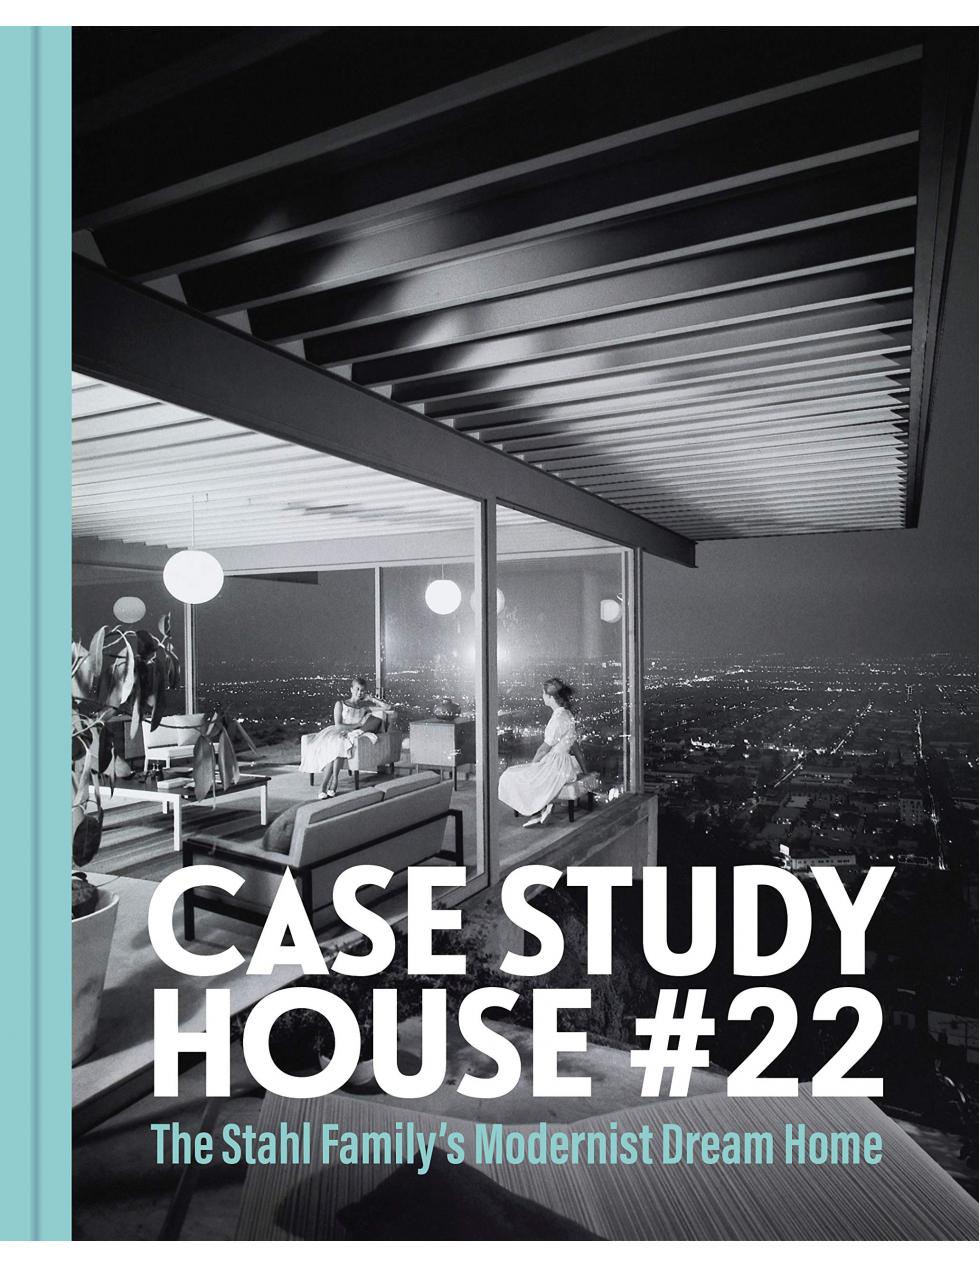 Book : THE STAHL HOUSE. CASE STUDY HOUSE #22 - The Making of a Modernist Icon